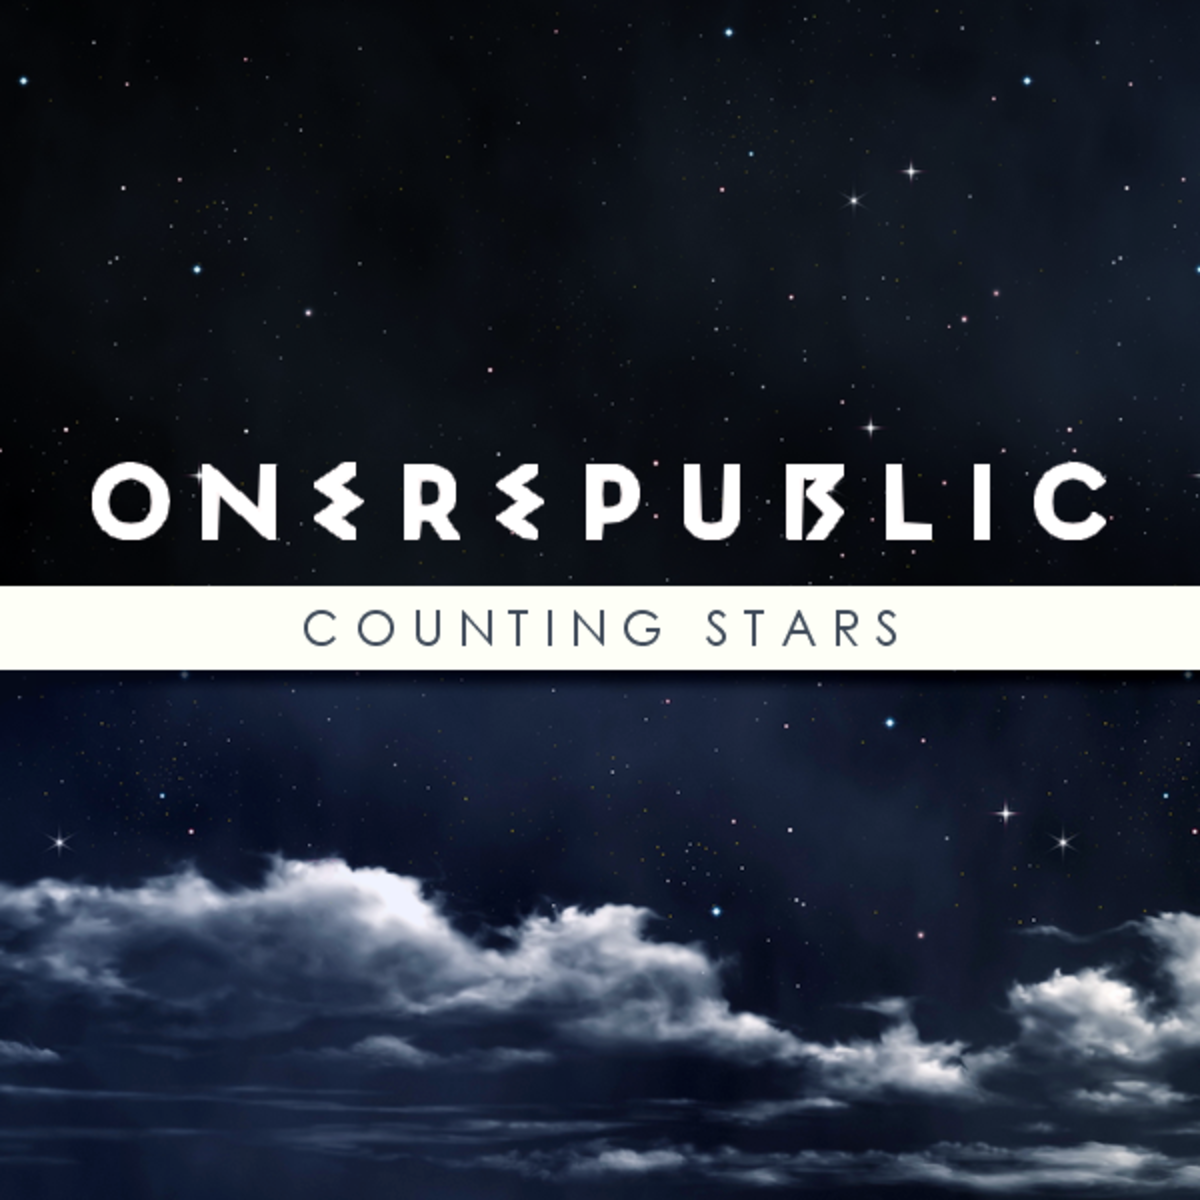 Cairns Soundtrack Counting Stars One Republic Counting stars, One